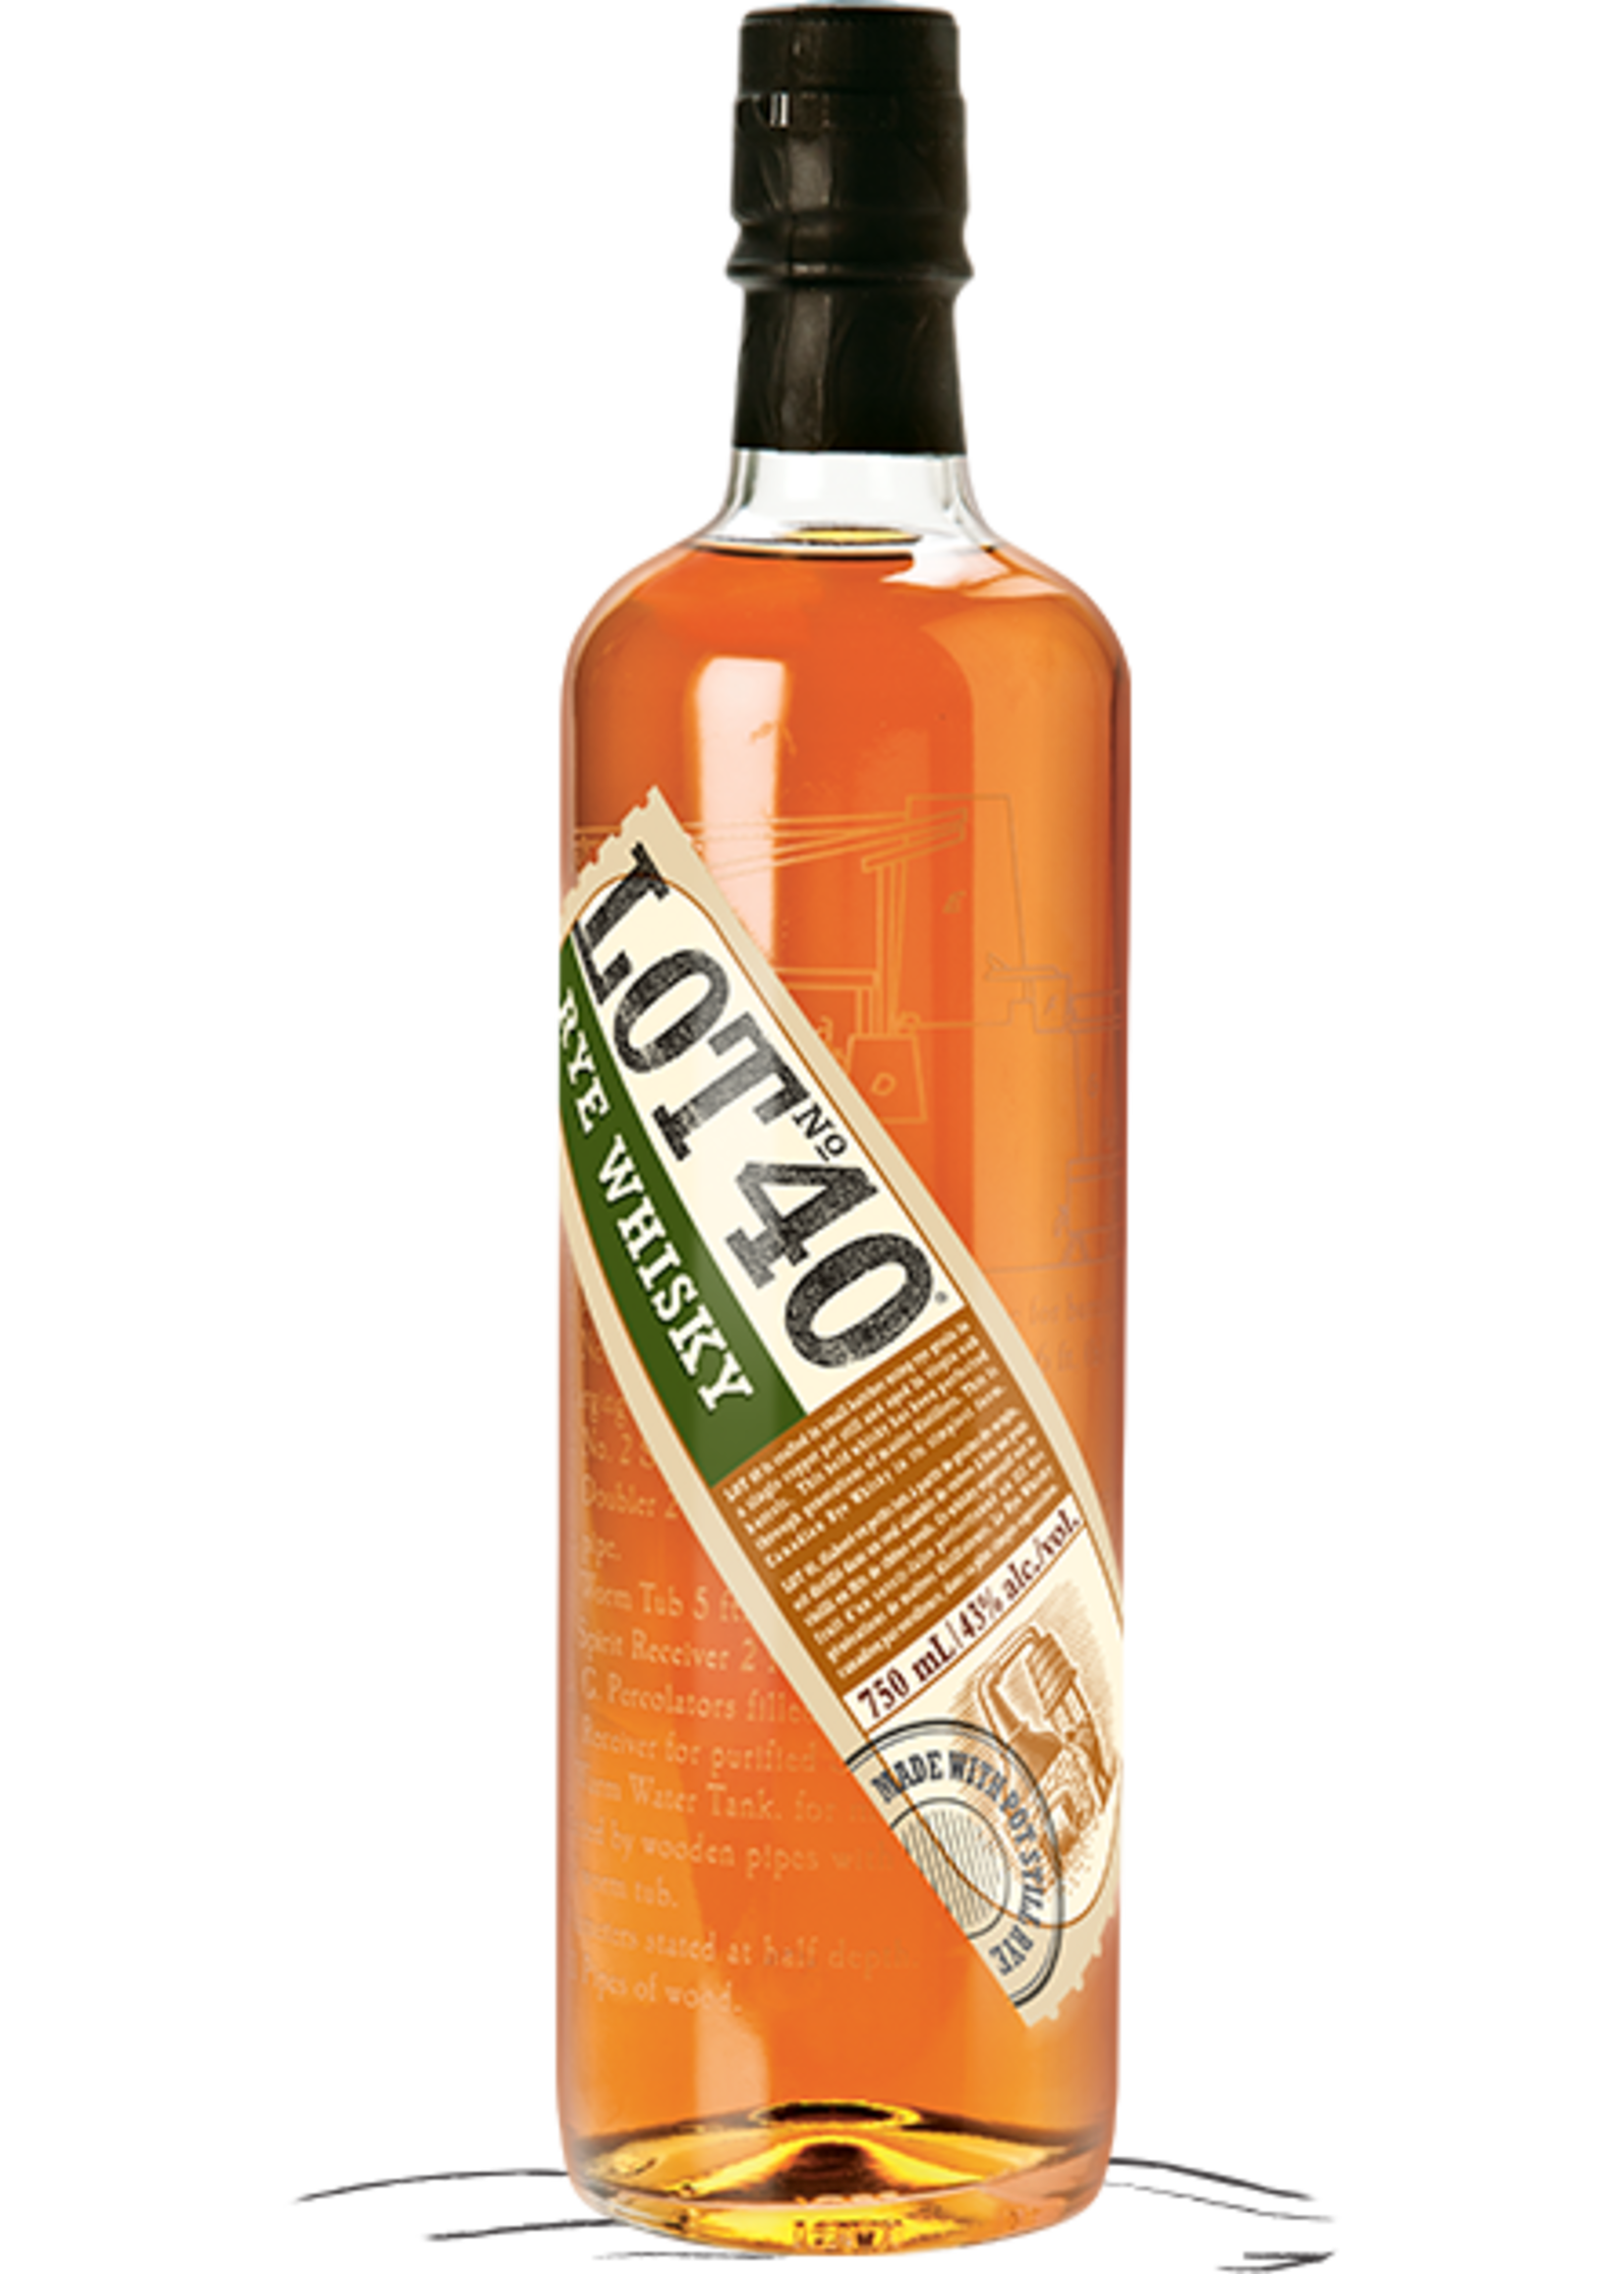 Lot 40 Lot 40 / Canadian Whiskey / 750mL